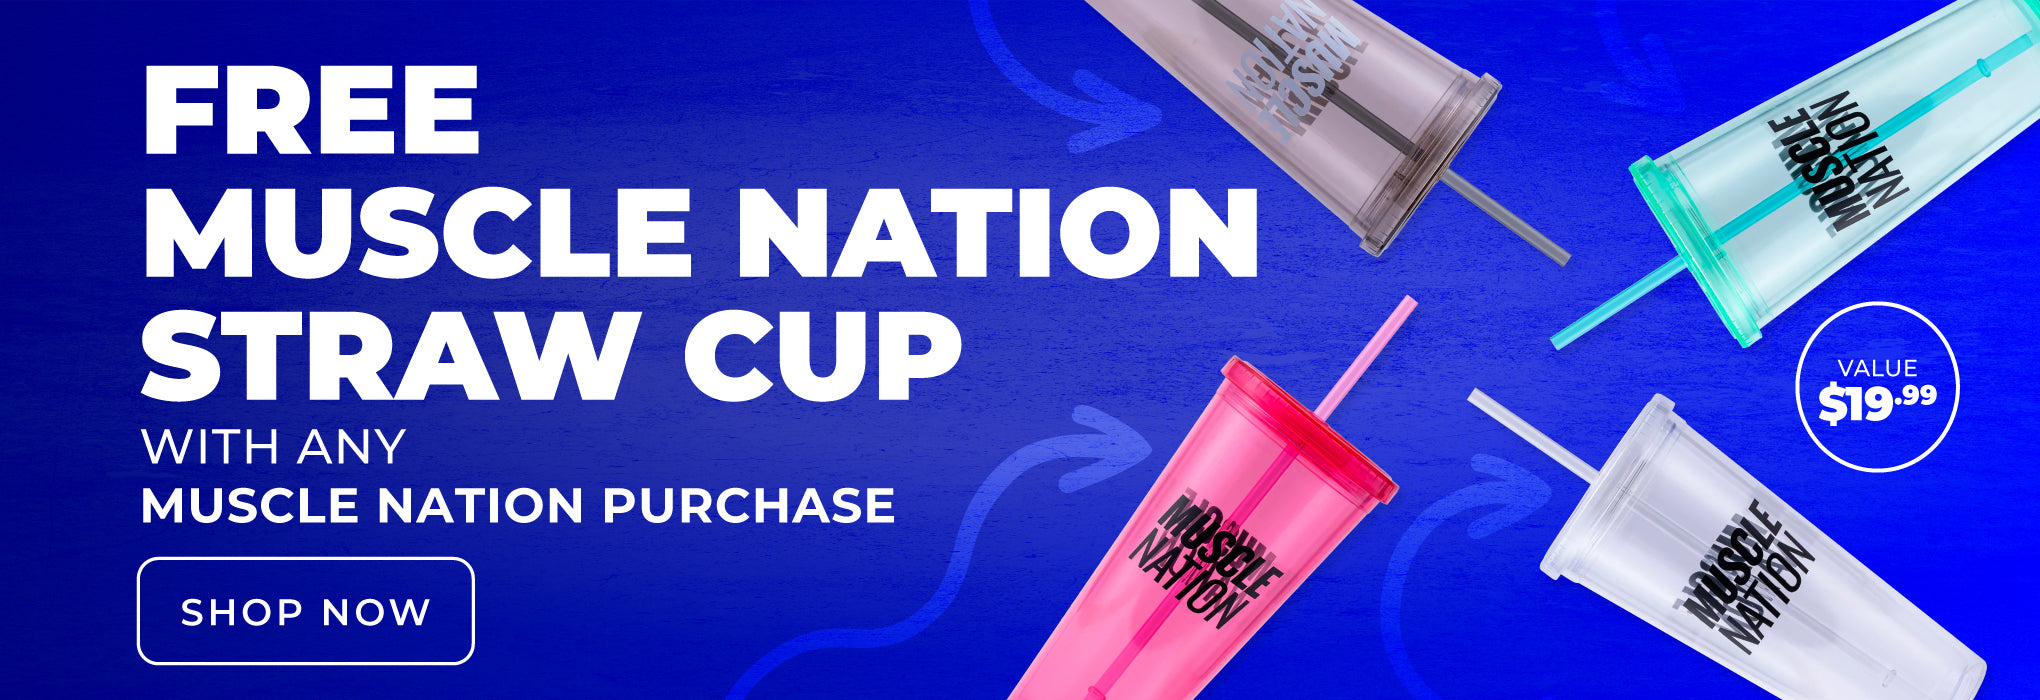 FREE Muscle Nation Straw Cup with any Muscle Nation Purchase